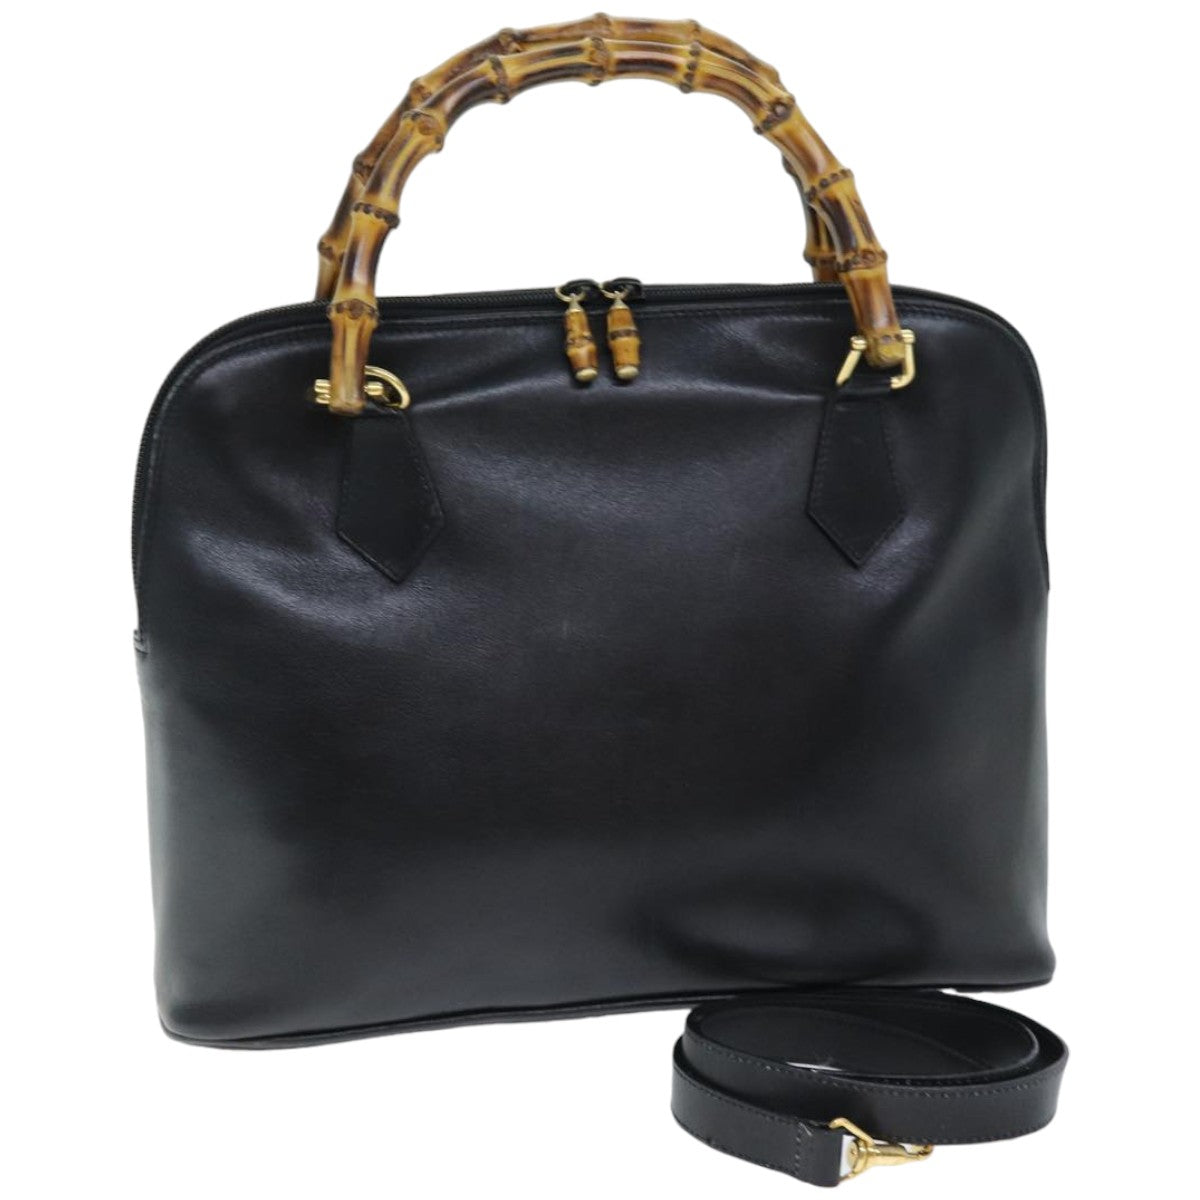 GUCCI Bamboo Hand Bag Leather 2way Black 000 1186 0289 Auth 75113